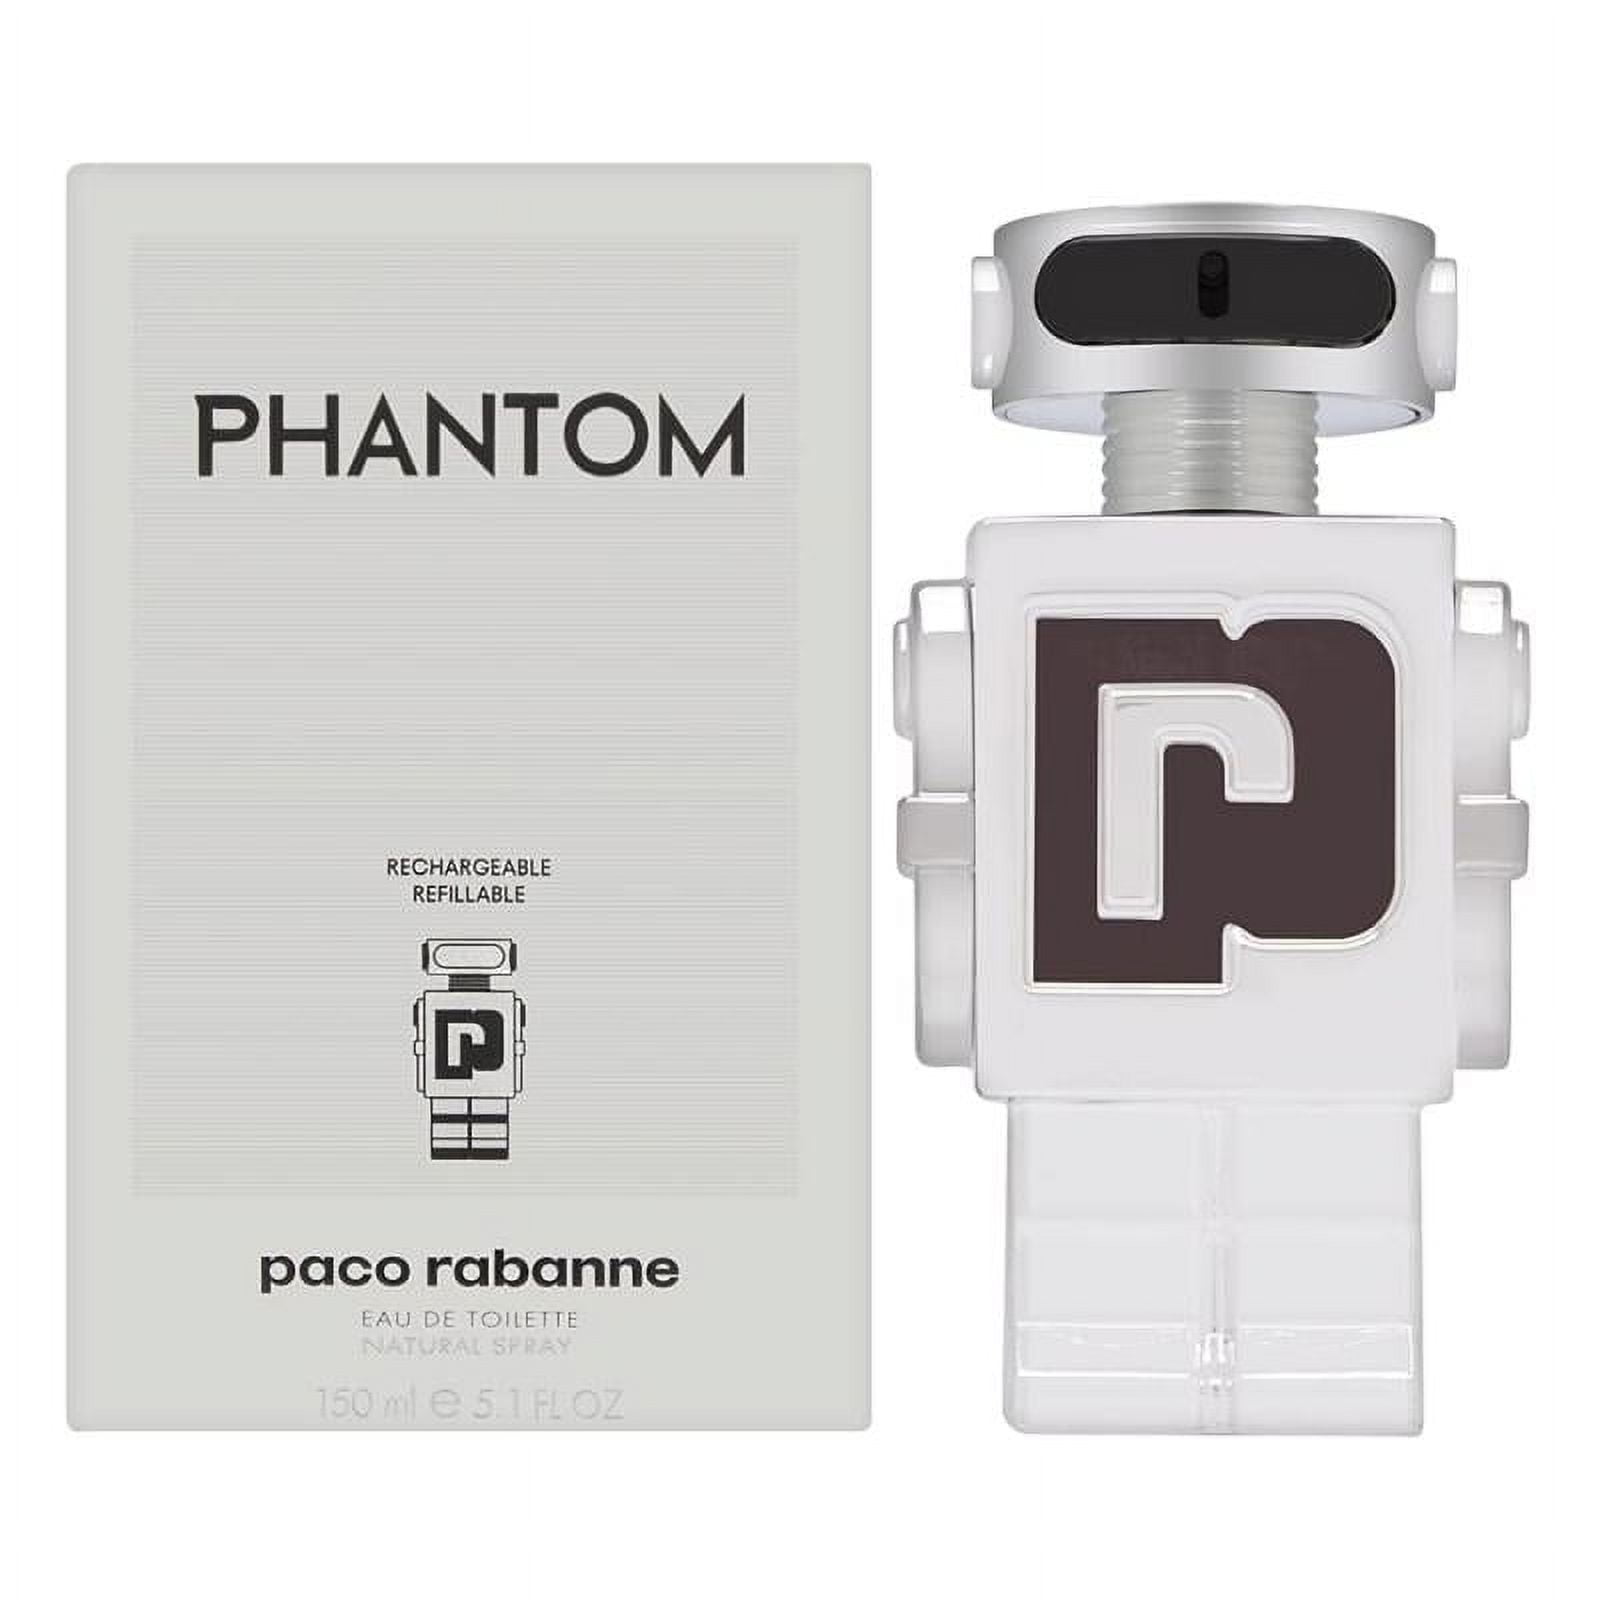 PHANTOM REFILLABLE BY PACO RABANNE By PACO RABANNE For MEN - Walmart.com